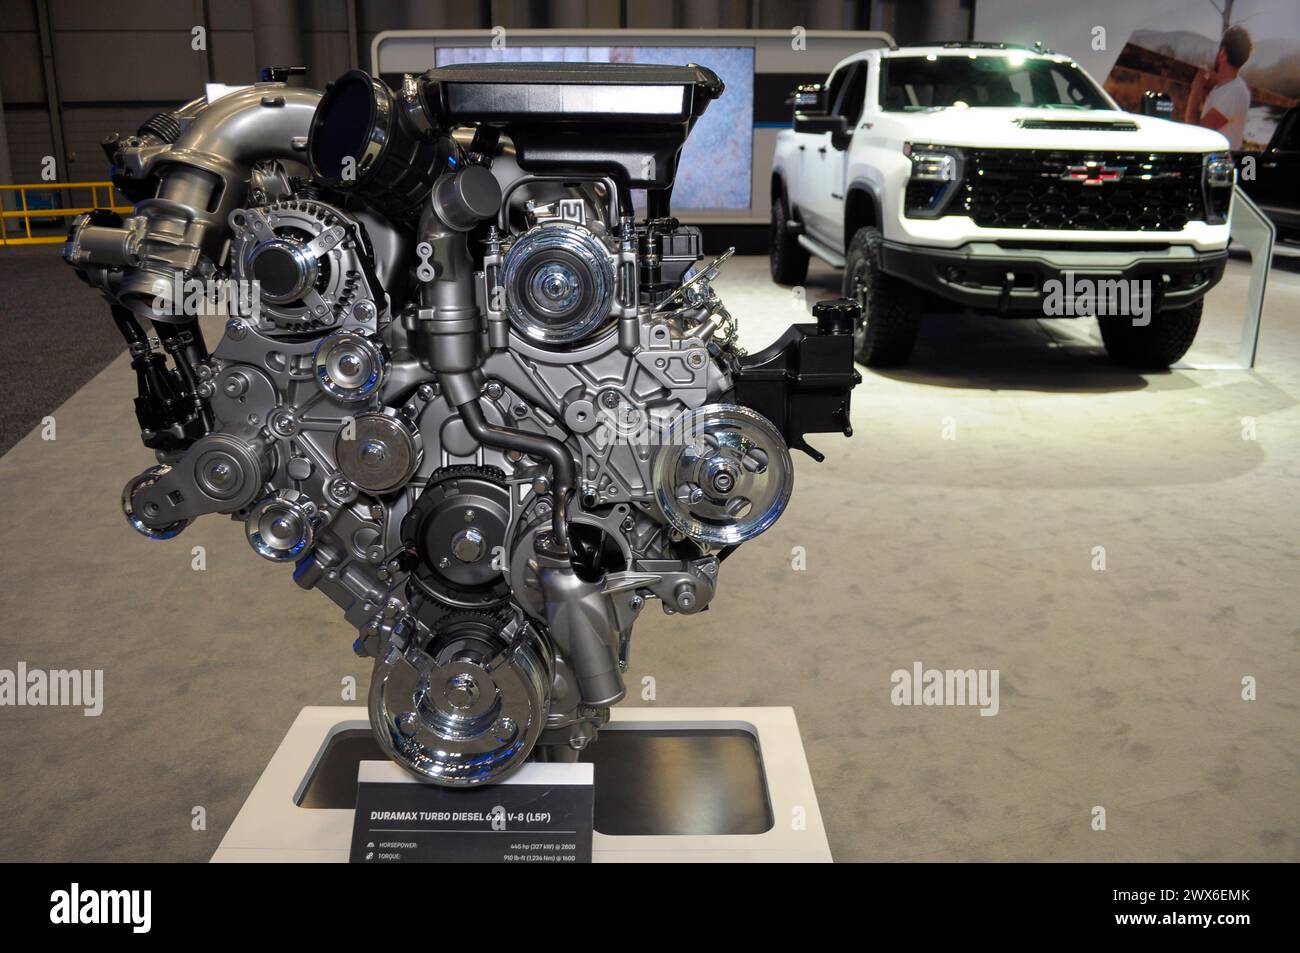 A Duramax Turbo Diesel 6.6L V-8 engine, left, is seen next to a 2024 Chevrolet Silverado HD ZR2 Bison vehicle on the first media day at the 2024 New York International Auto Show in the Jacob K. Javits Convention Center. The annual NYIAS in Manhattan, New York City featured various car companies, debuts of new vehicles and automobile industry professionals. The show which opens to the public on March 29 and ends on April 7, attracts thousands of car enthusiasts. The NYIAS began in 1900 showcasing automobiles and examples of future car technology. Stock Photo